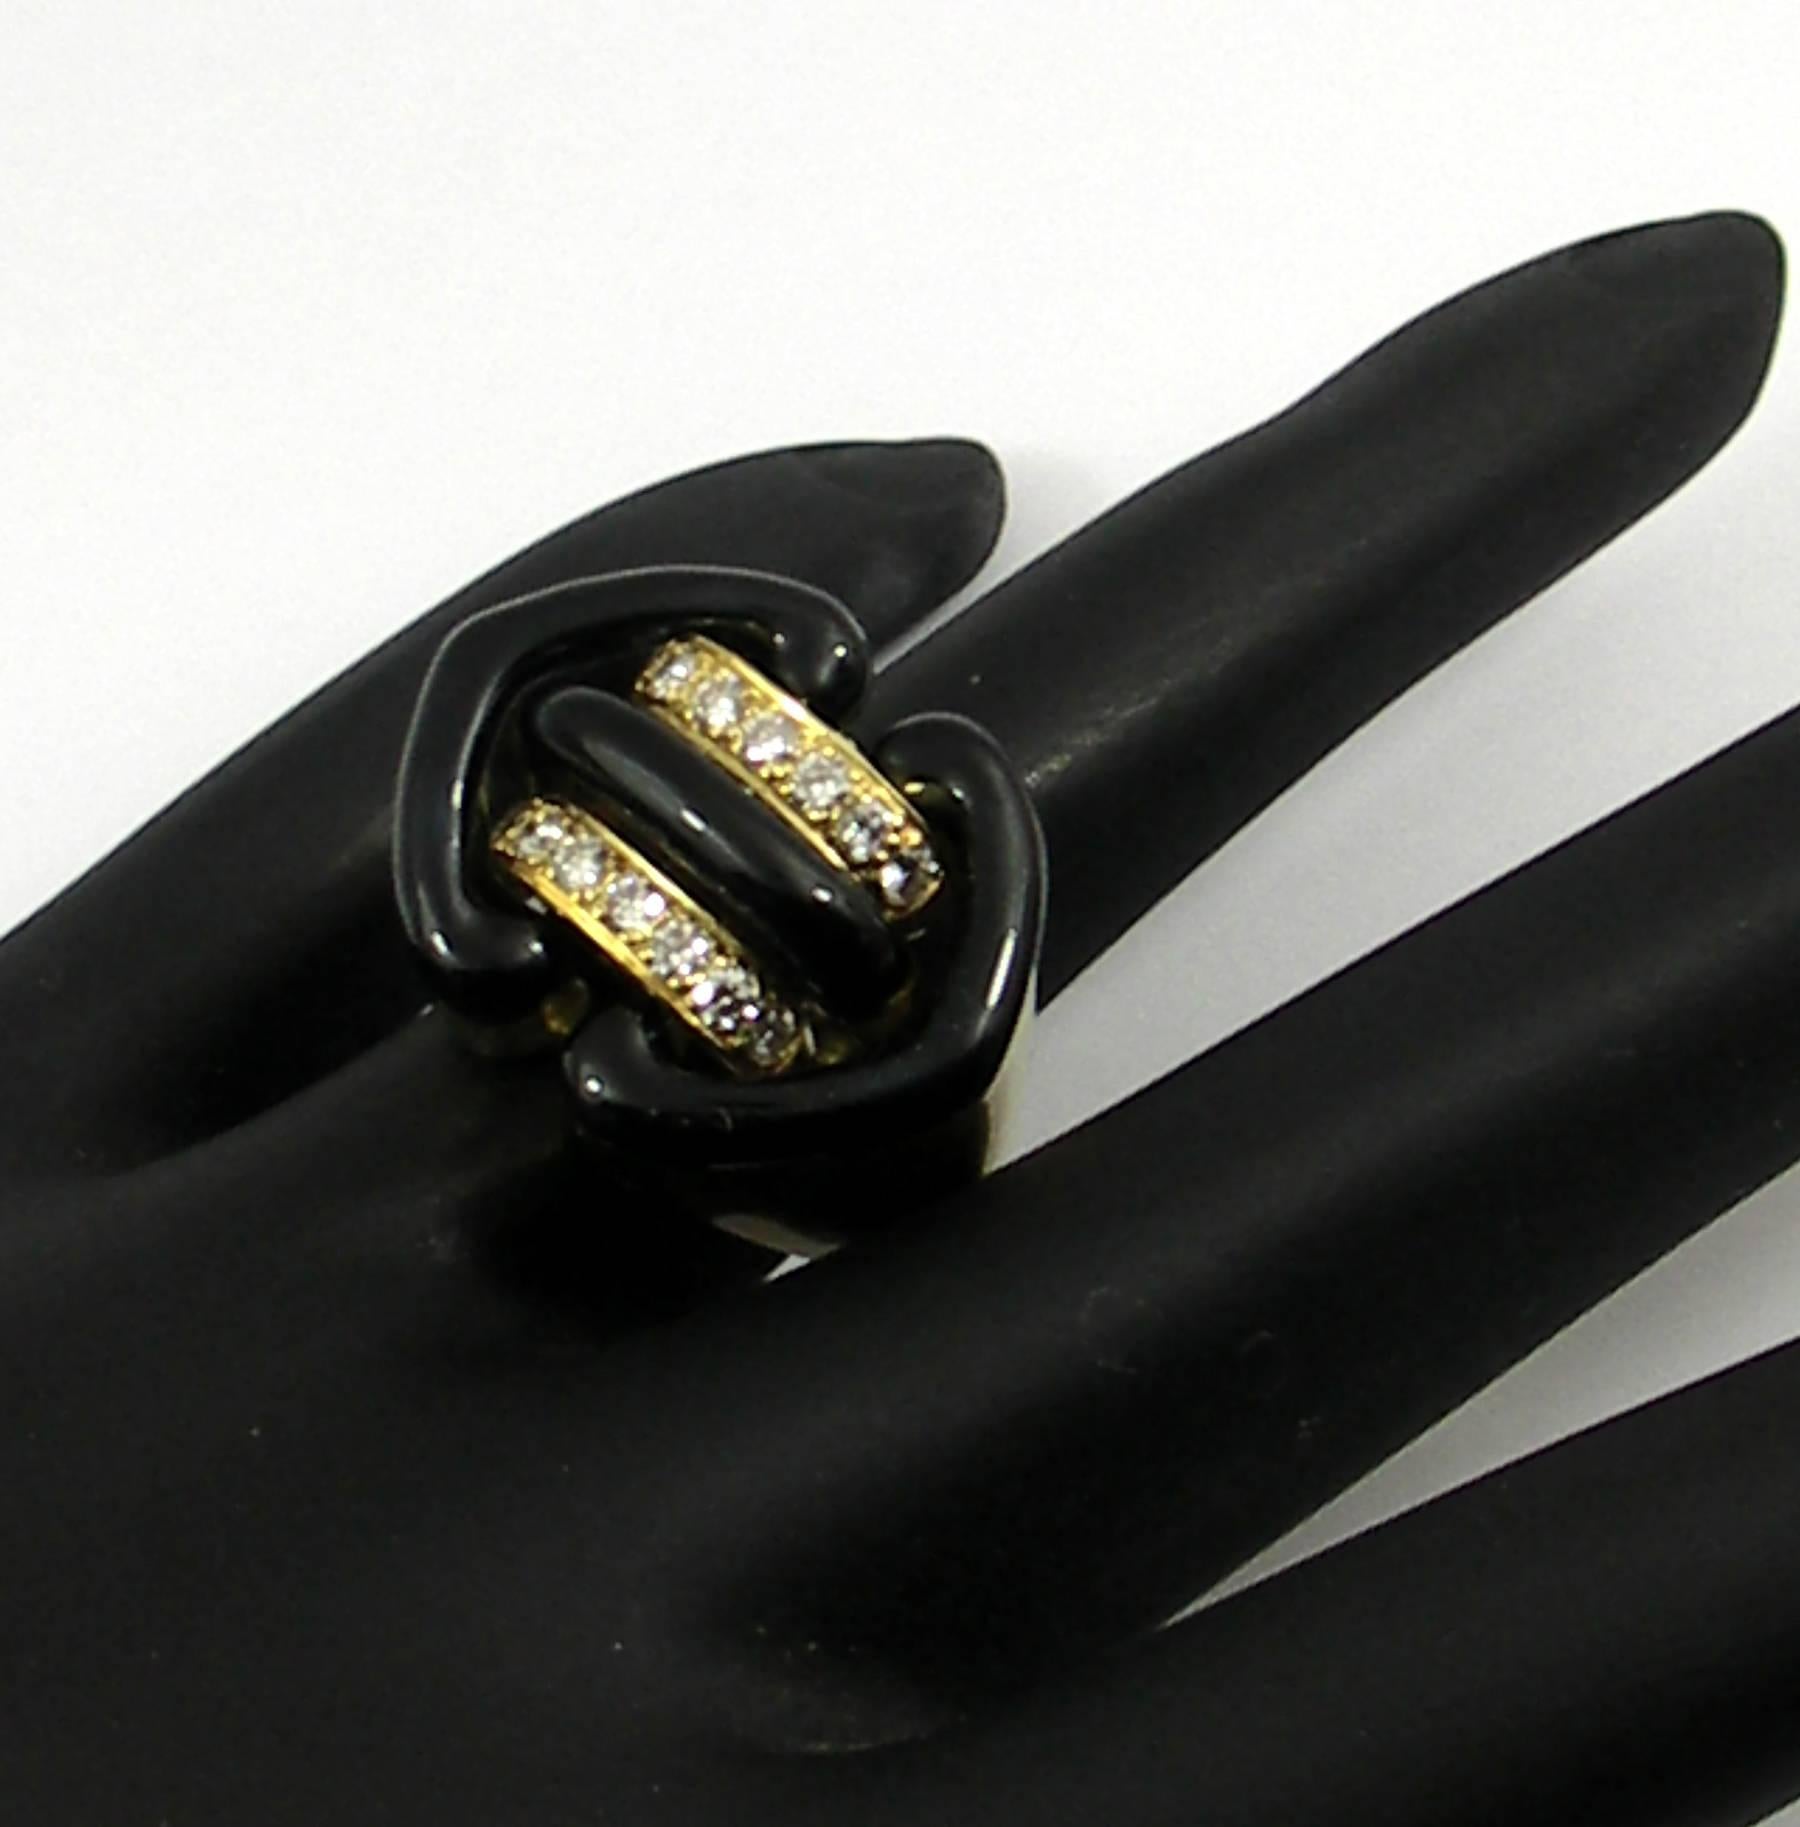 An 18K gold ring signed Clunn for Andrew Clunn, with a tailored design. Measuring 3/4 of an inch long, and 1 inch wide, the design is beautifully embellished with black enamel, and set with 14 round brilliant cut diamonds, weighing 0.66ct total